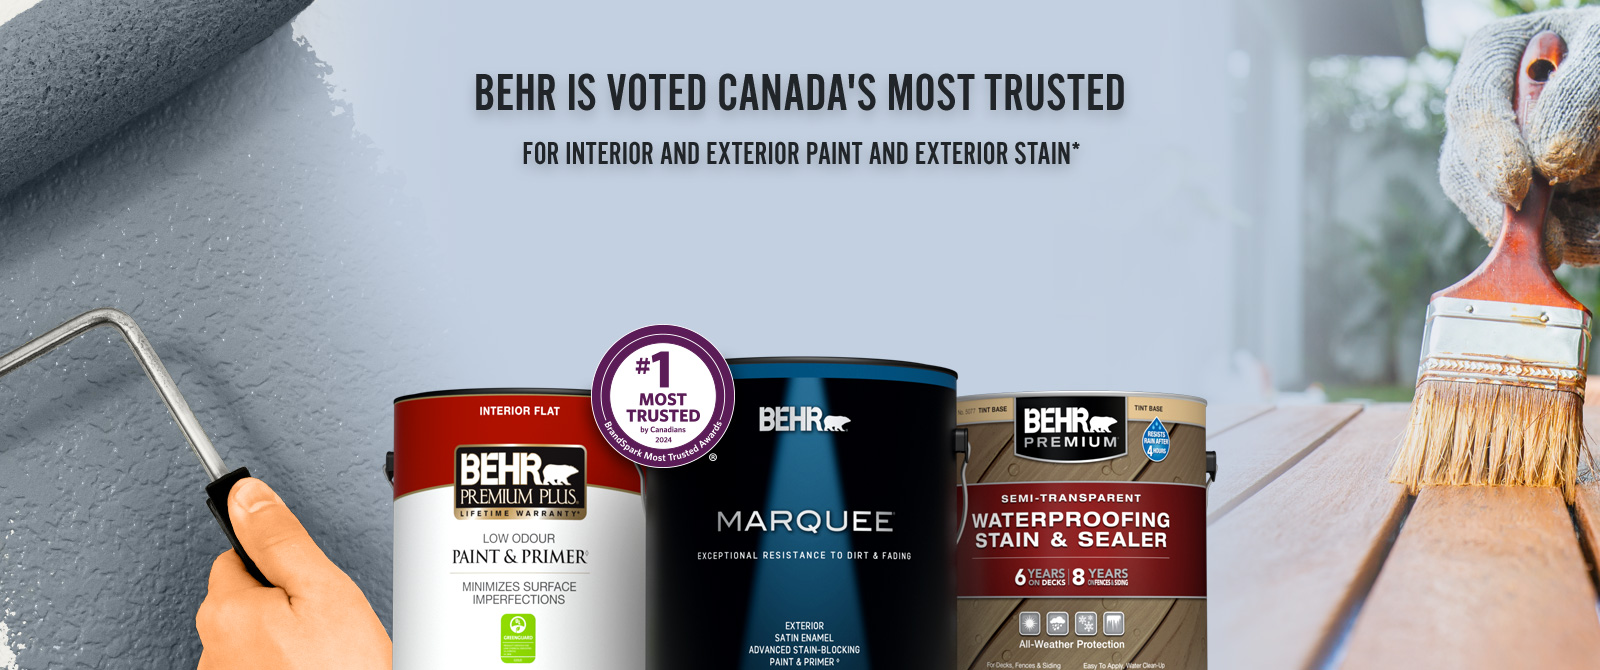 BEHR is voted Canada's Most Trusted for Interior and Exterior Paint and Exterior Stain